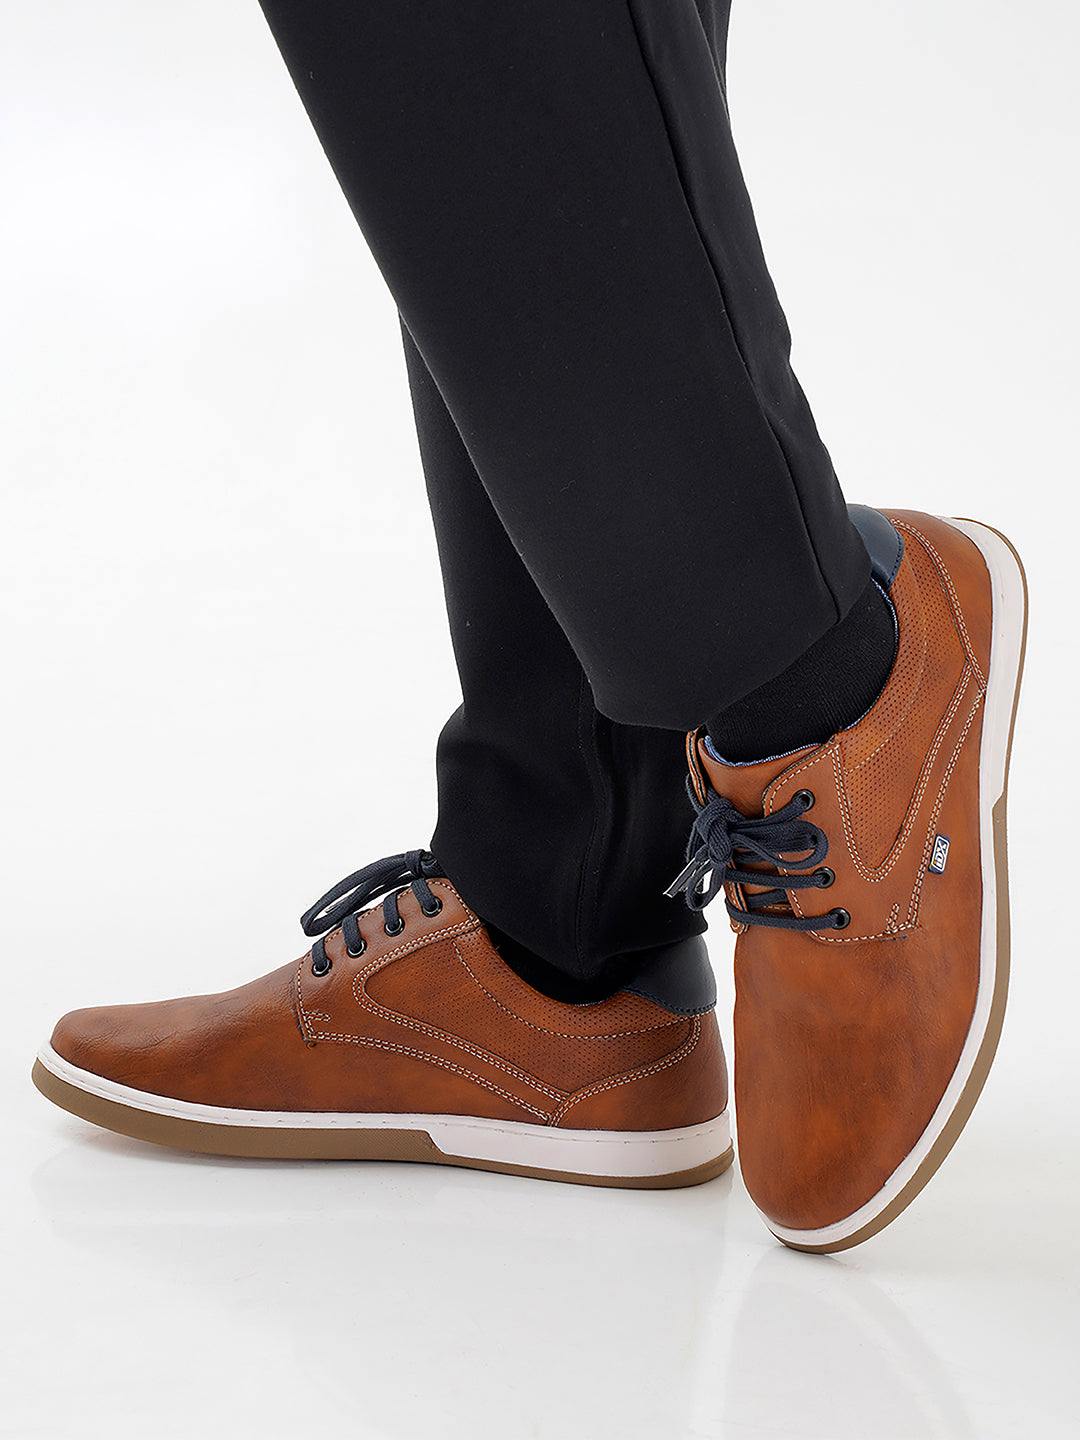 Buy Men's Tan Round Toe Lace Up Casual (IX1017) Online